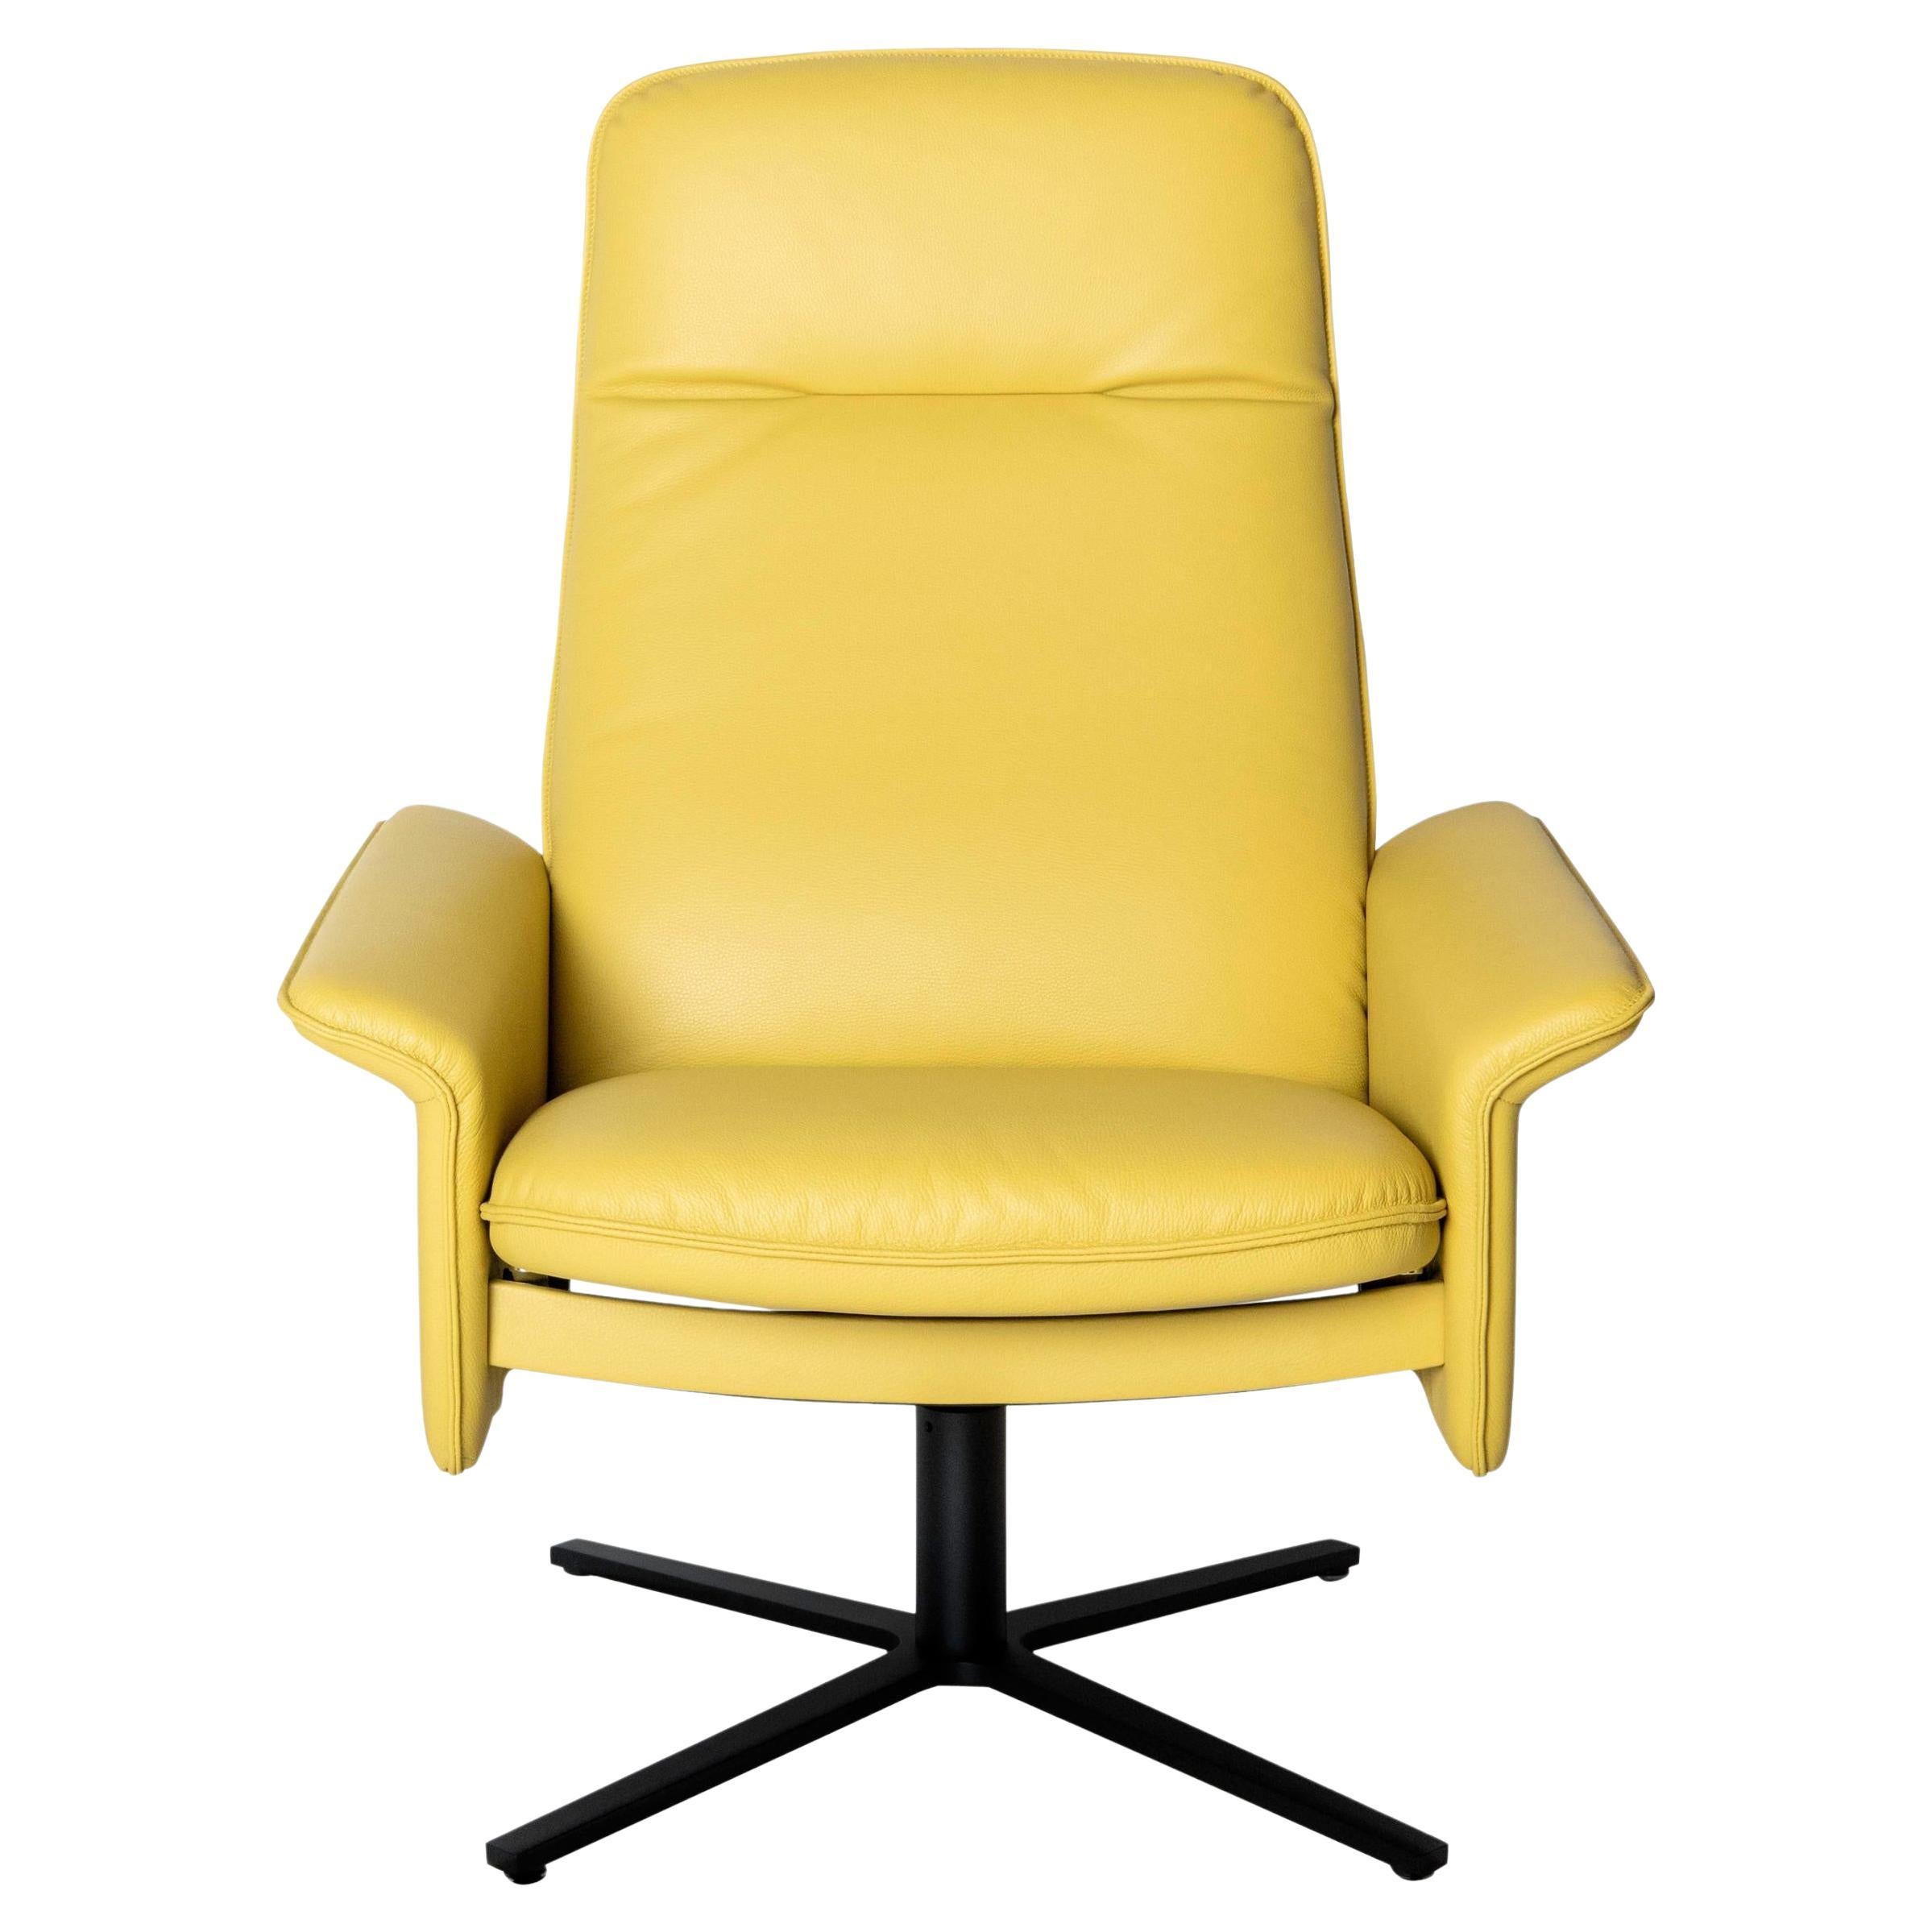 De Sede DS 55 High Back Chair in Yellow Leather Upholstery, De Sede Design Team